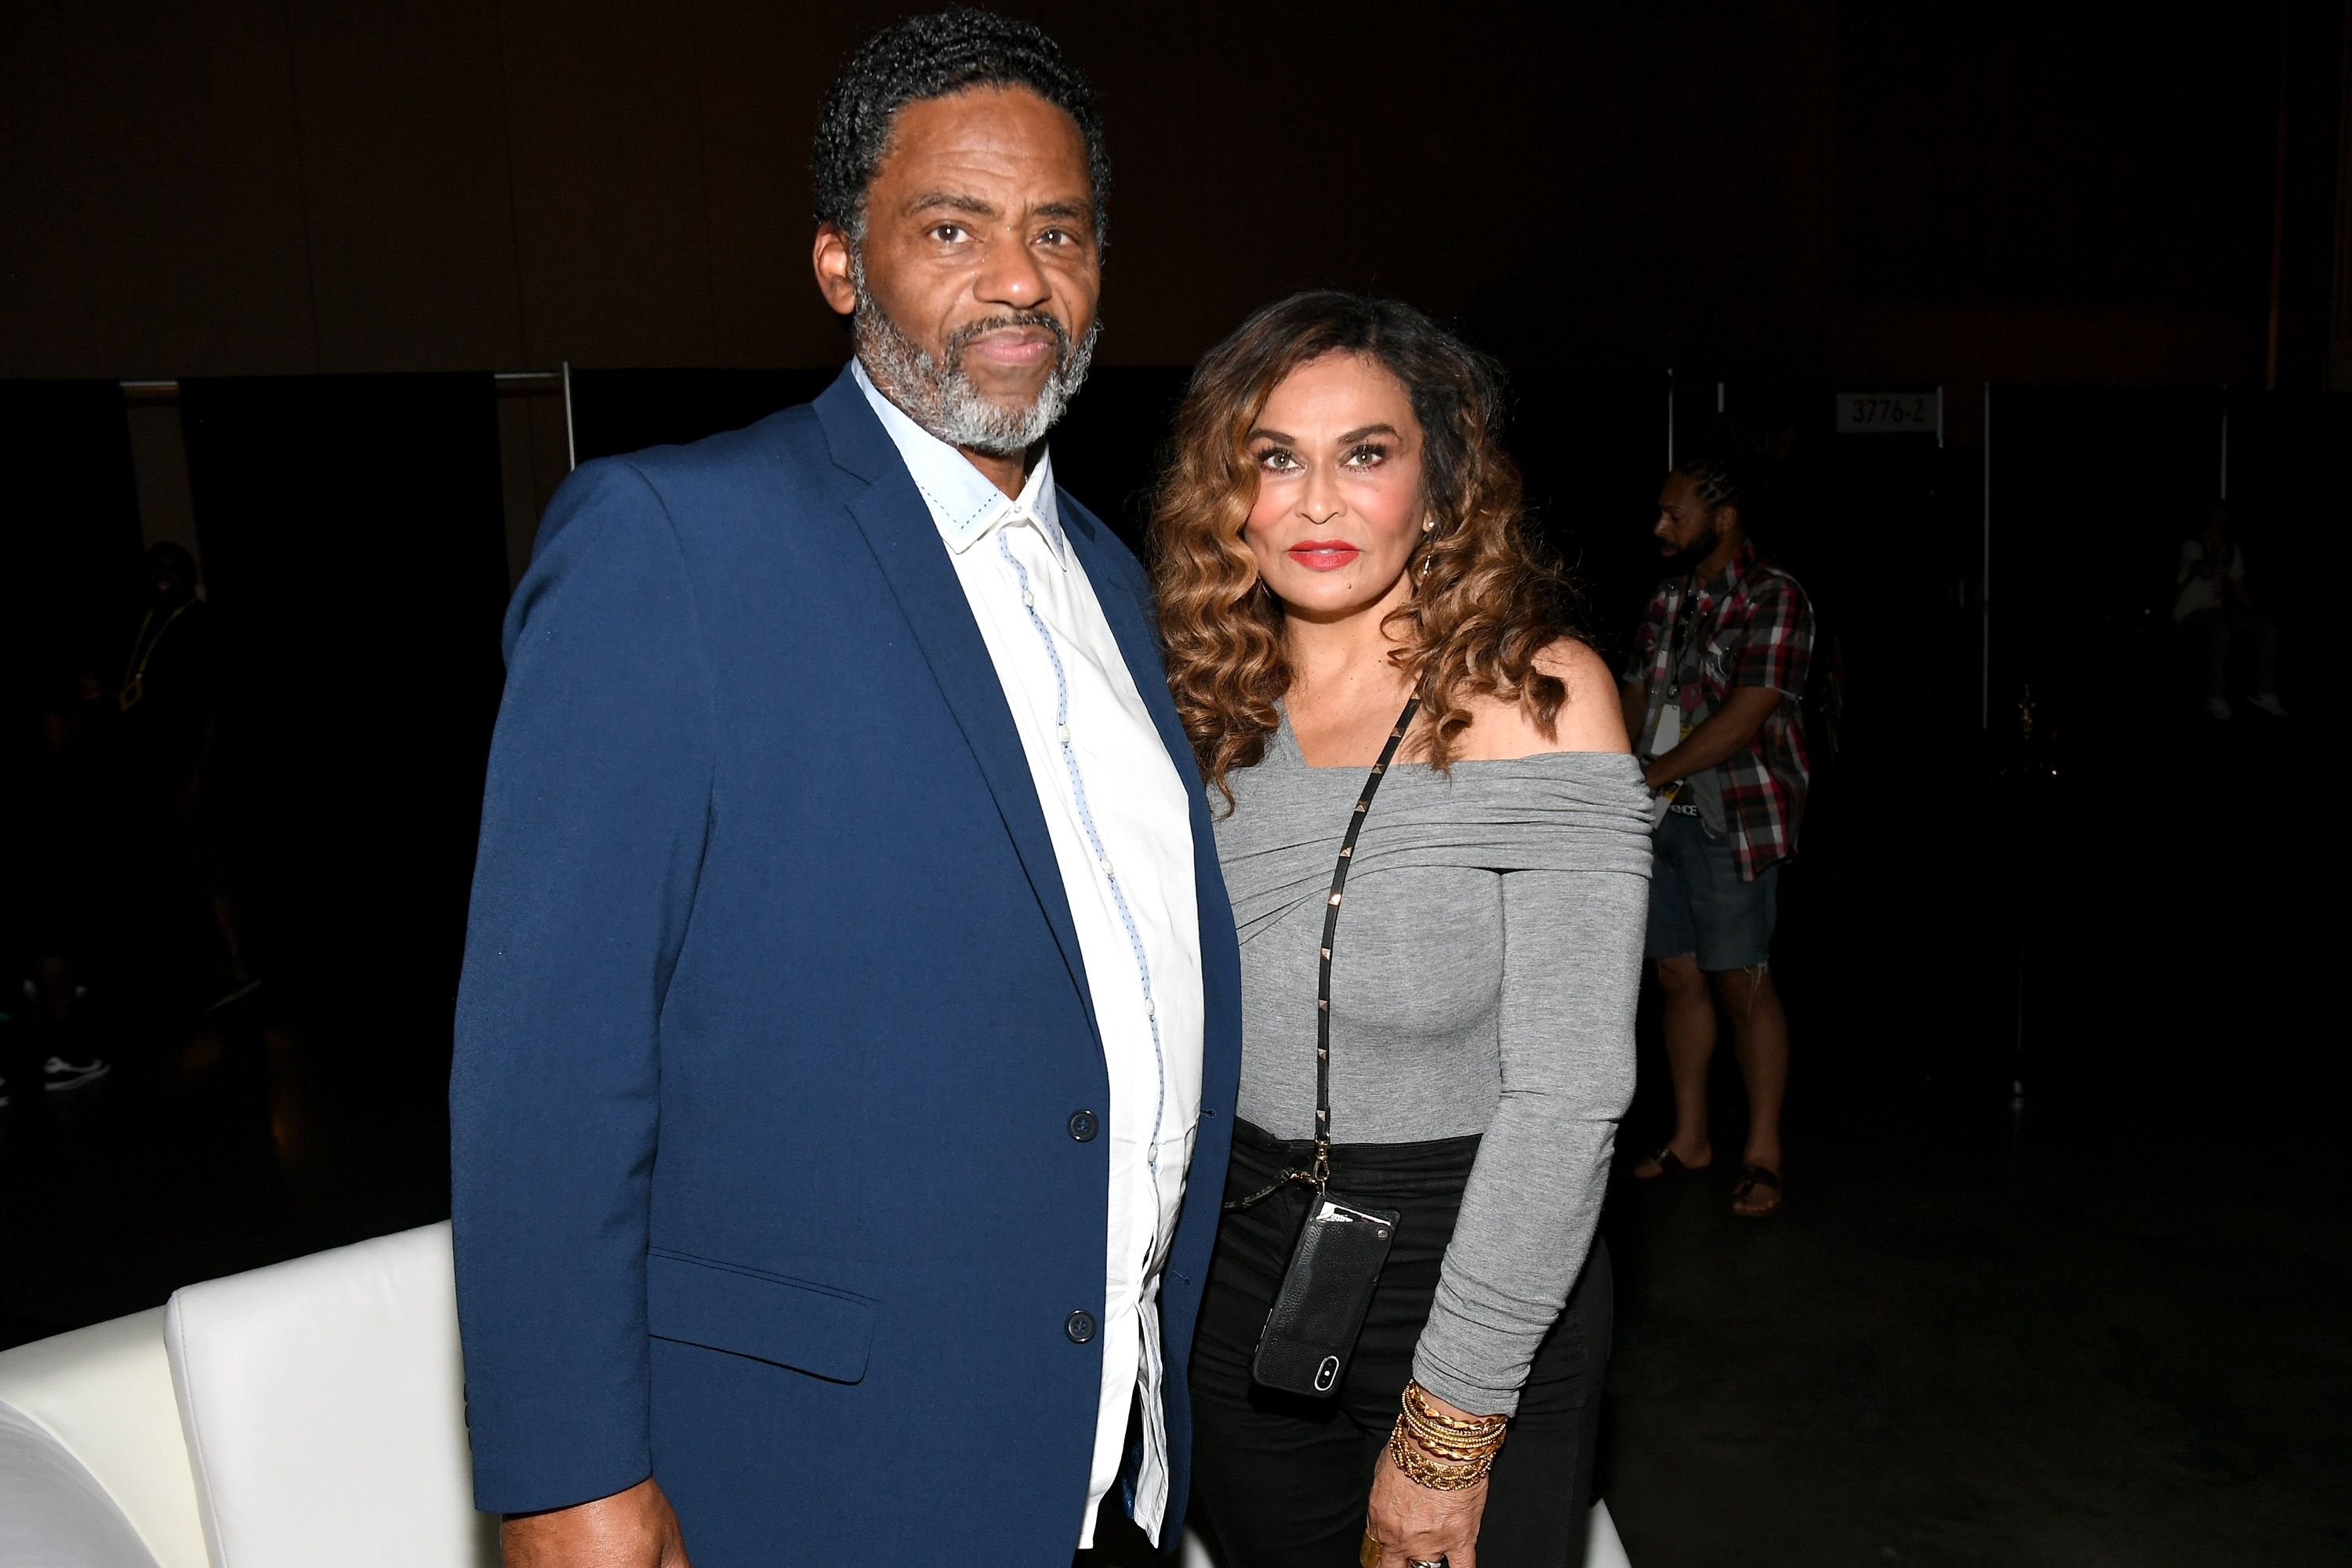 Richard Lawson and Tina Knowles-Lawson at the 2019 ESSENCE Festival in 2019 in New Orleans | Source: Getty Images